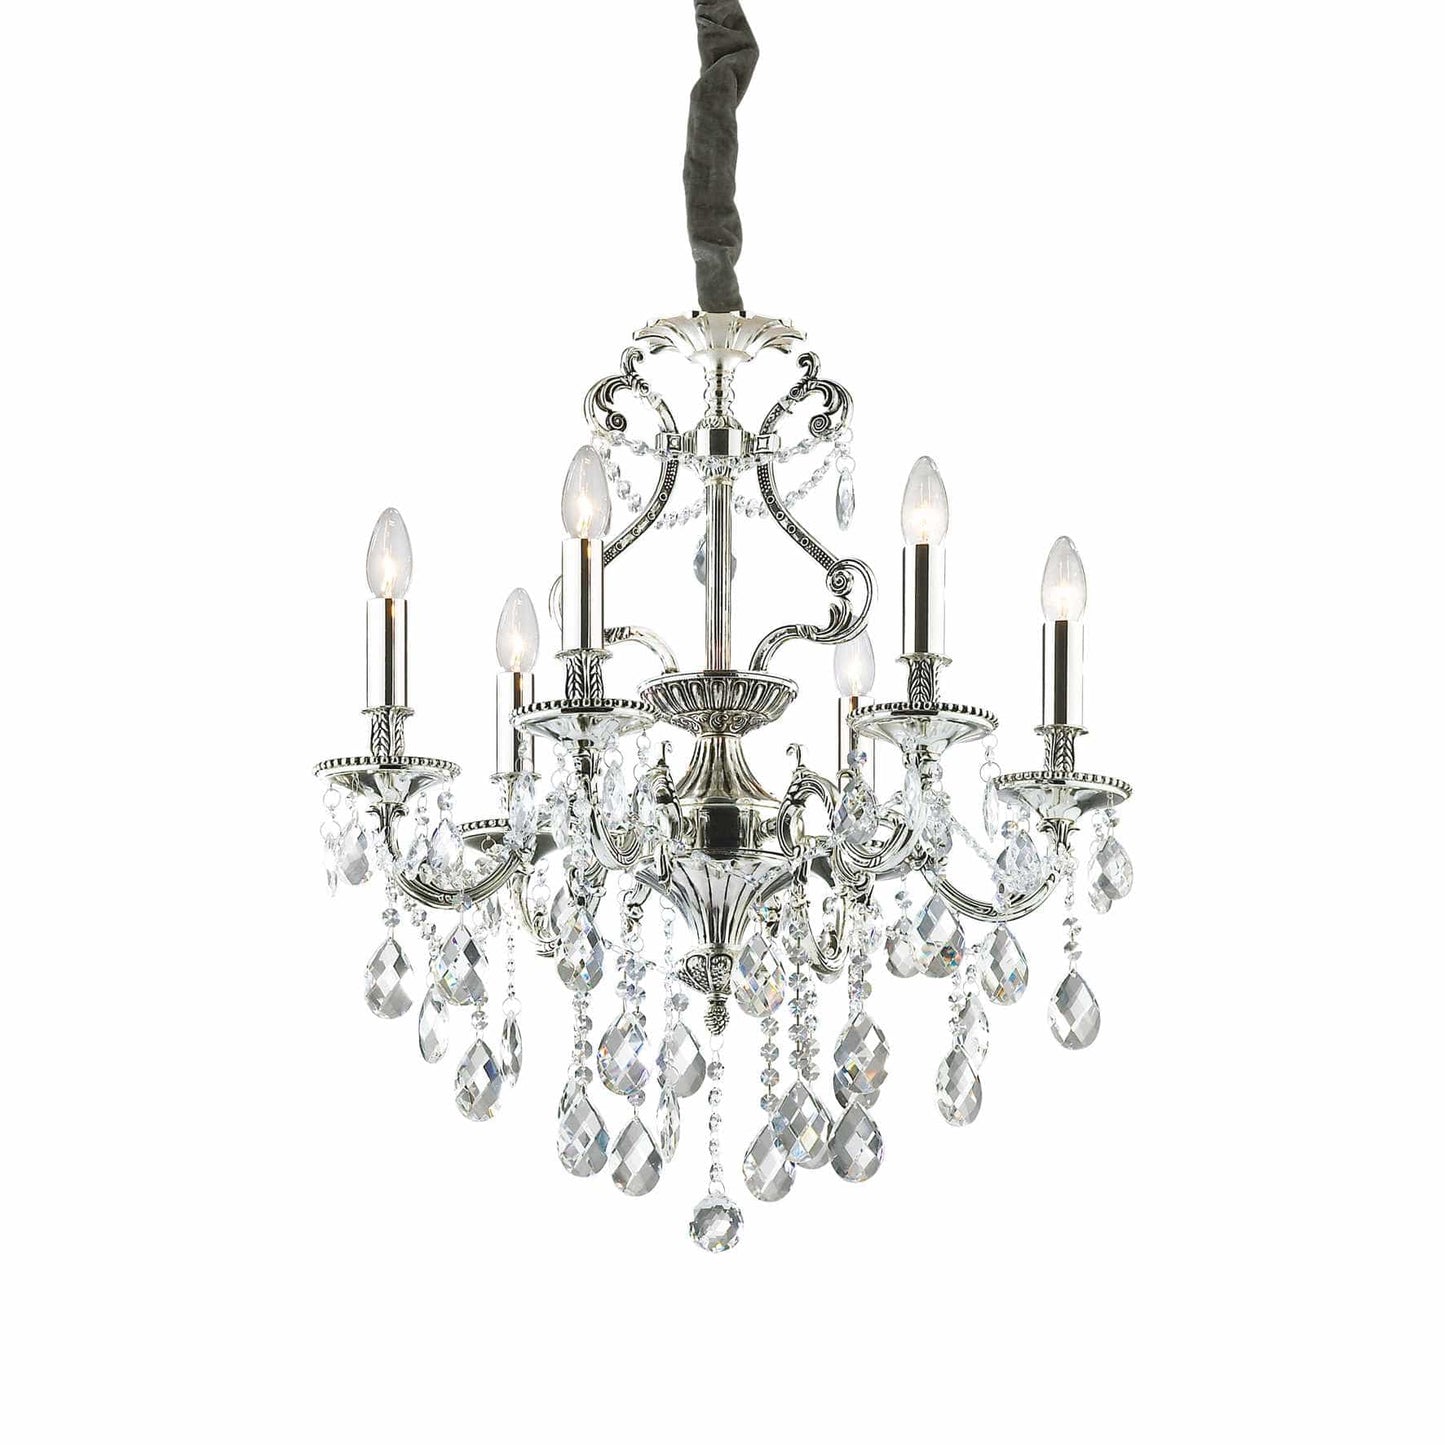 Ideal Lux Lighting Chandeliers Gioconda (Mona Lisa) SP6 Crystal Chandelier, gold or antique silver